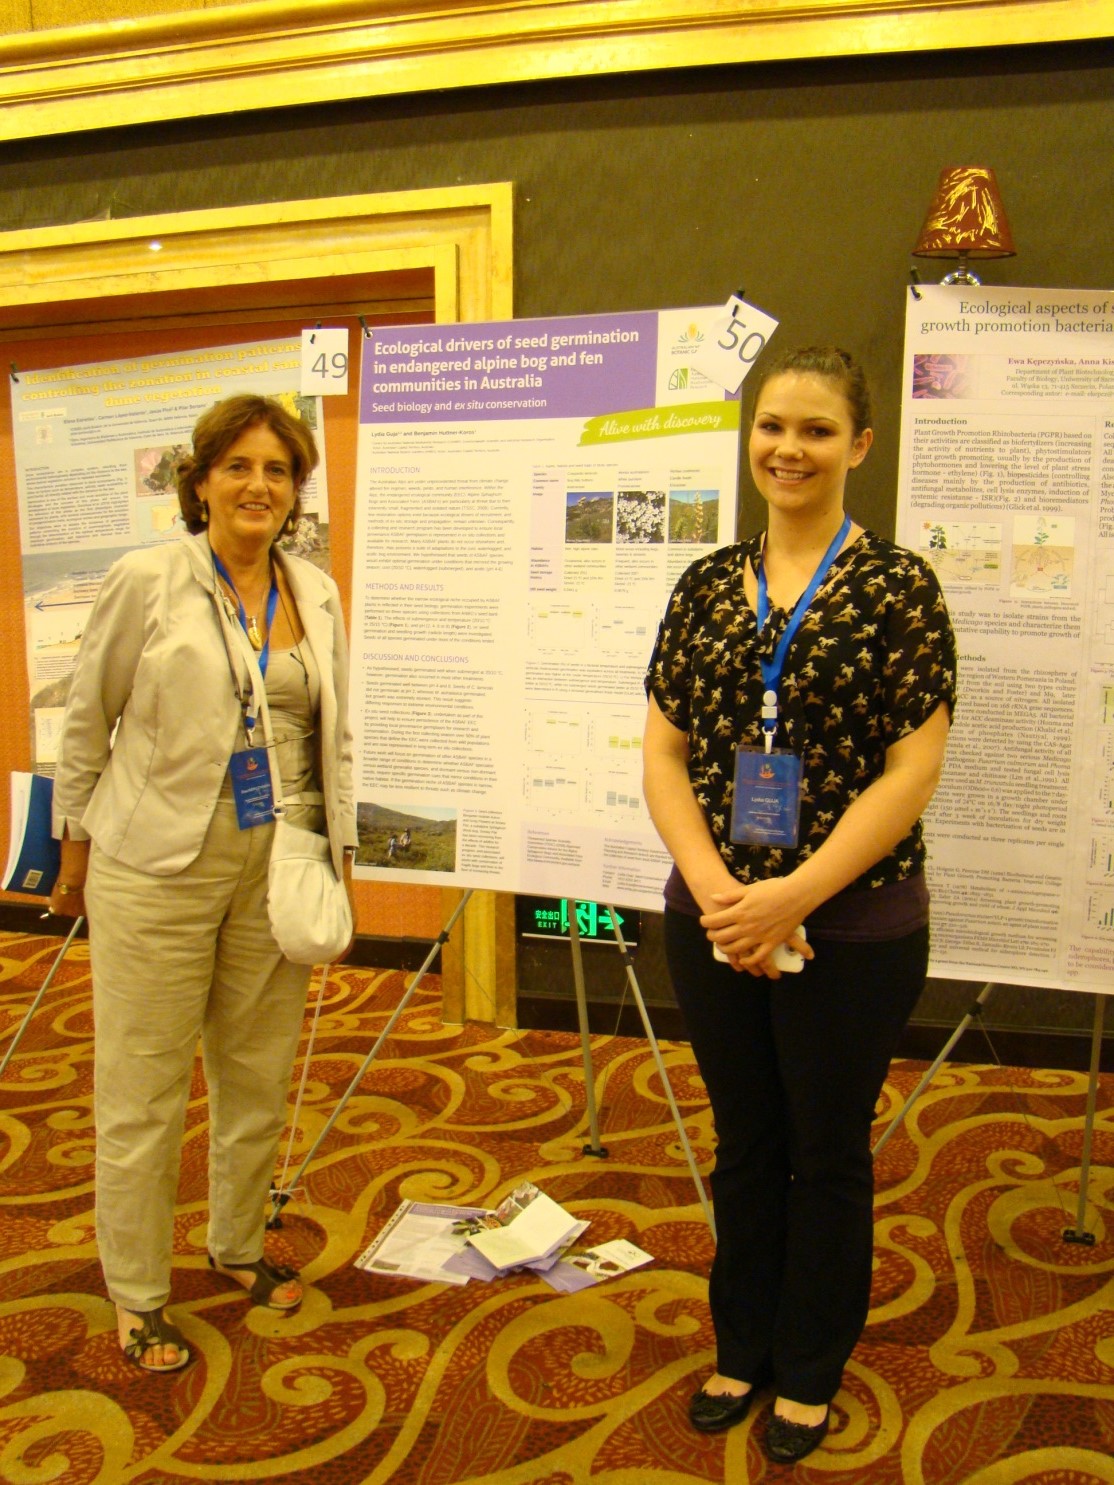 presenting at the poster session